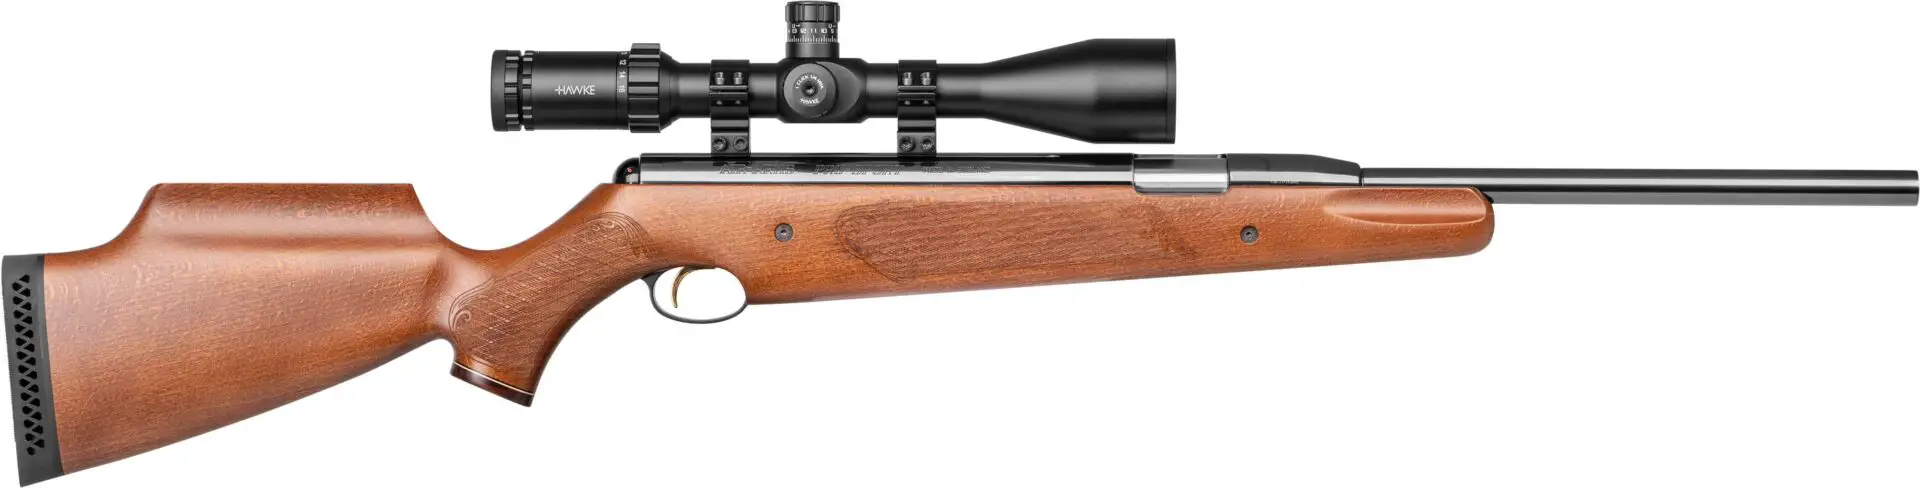 pro1 Best Spring Air Rifles - Top 7 Springers for the money (Reviews & Buying Guides 2022)